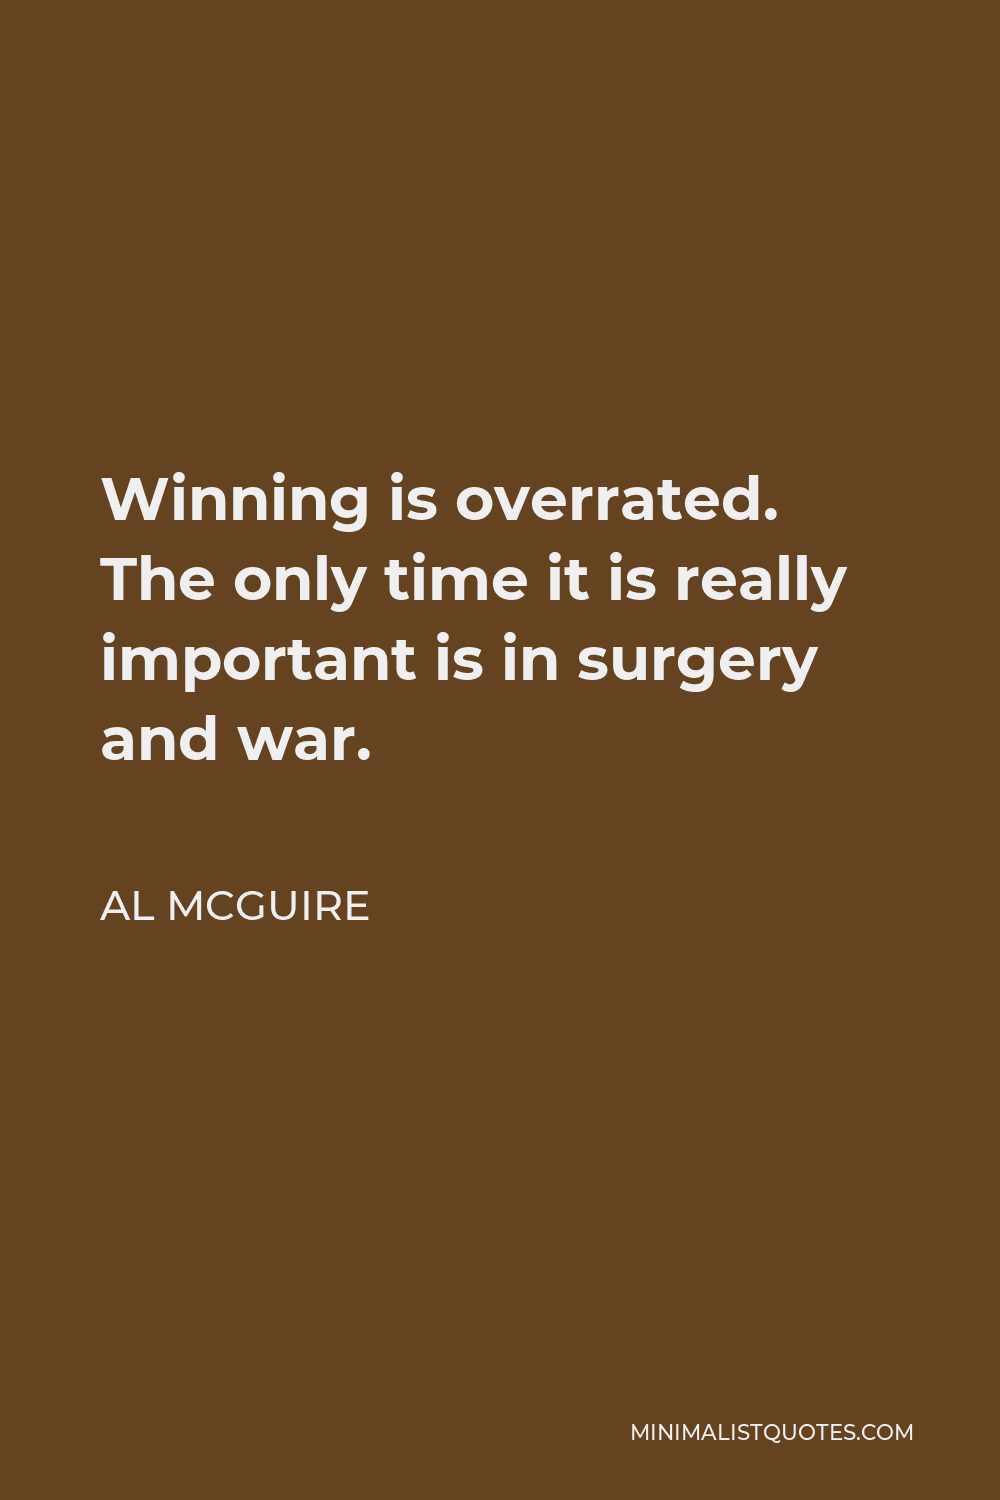 Al McGuire Quote - Winning is overrated. The only time it is really important is in surgery and war.